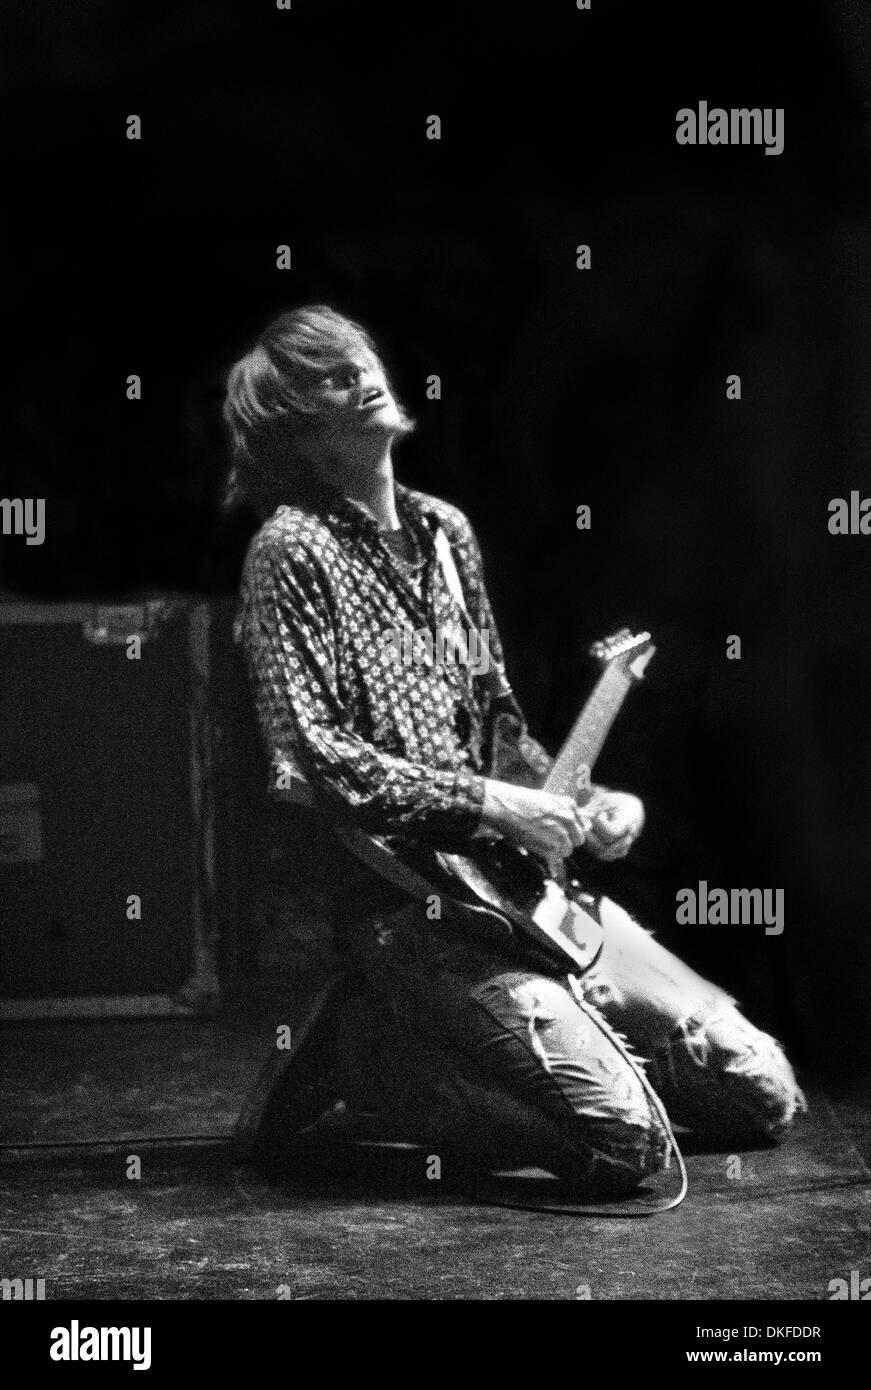 Thurston Moore, Sonic Youth, live auf der Bühne des Town & Country Club London 1987 Stockfoto